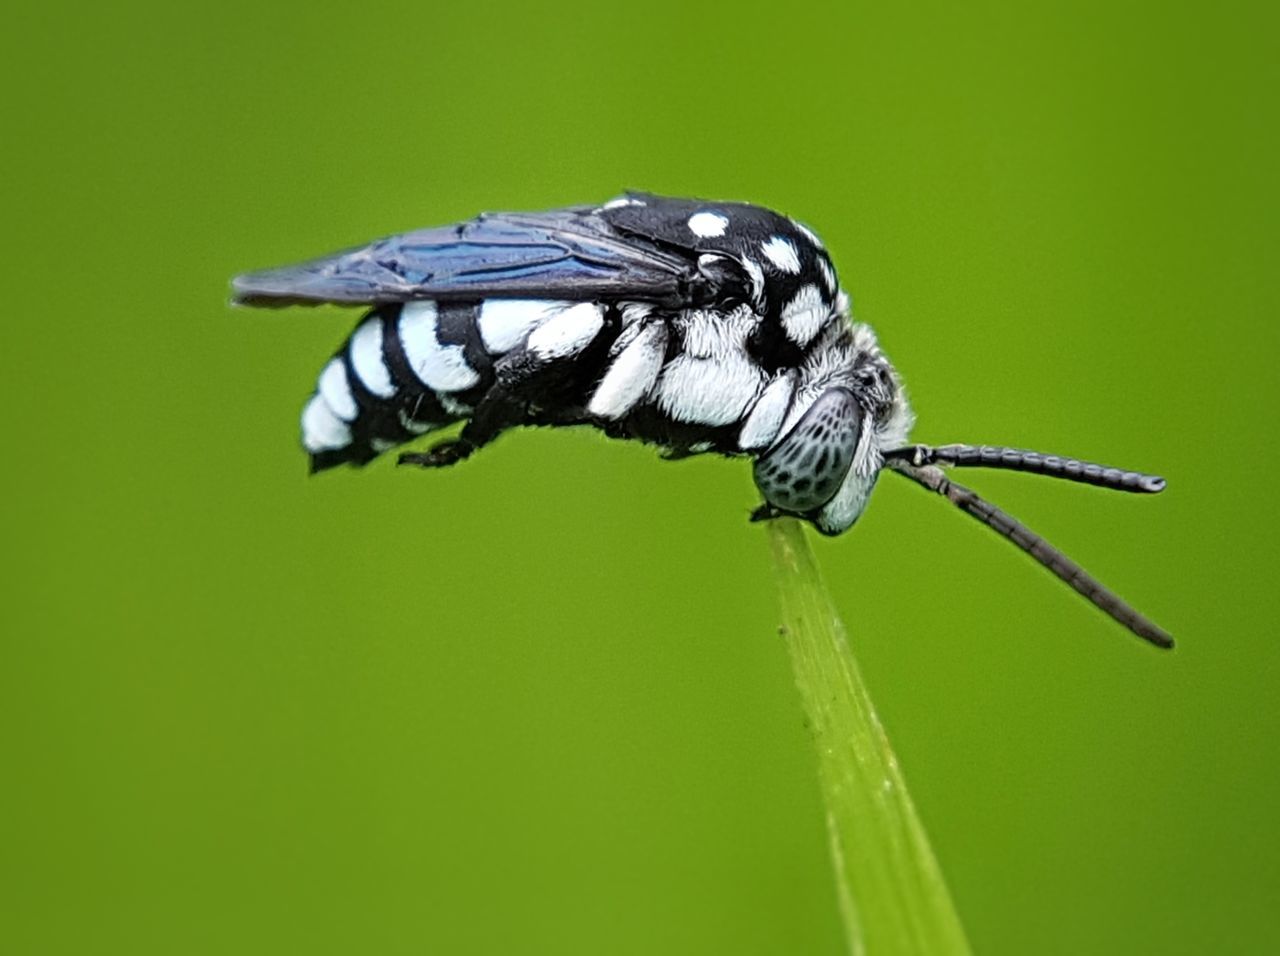 CLOSE-UP OF INSECT